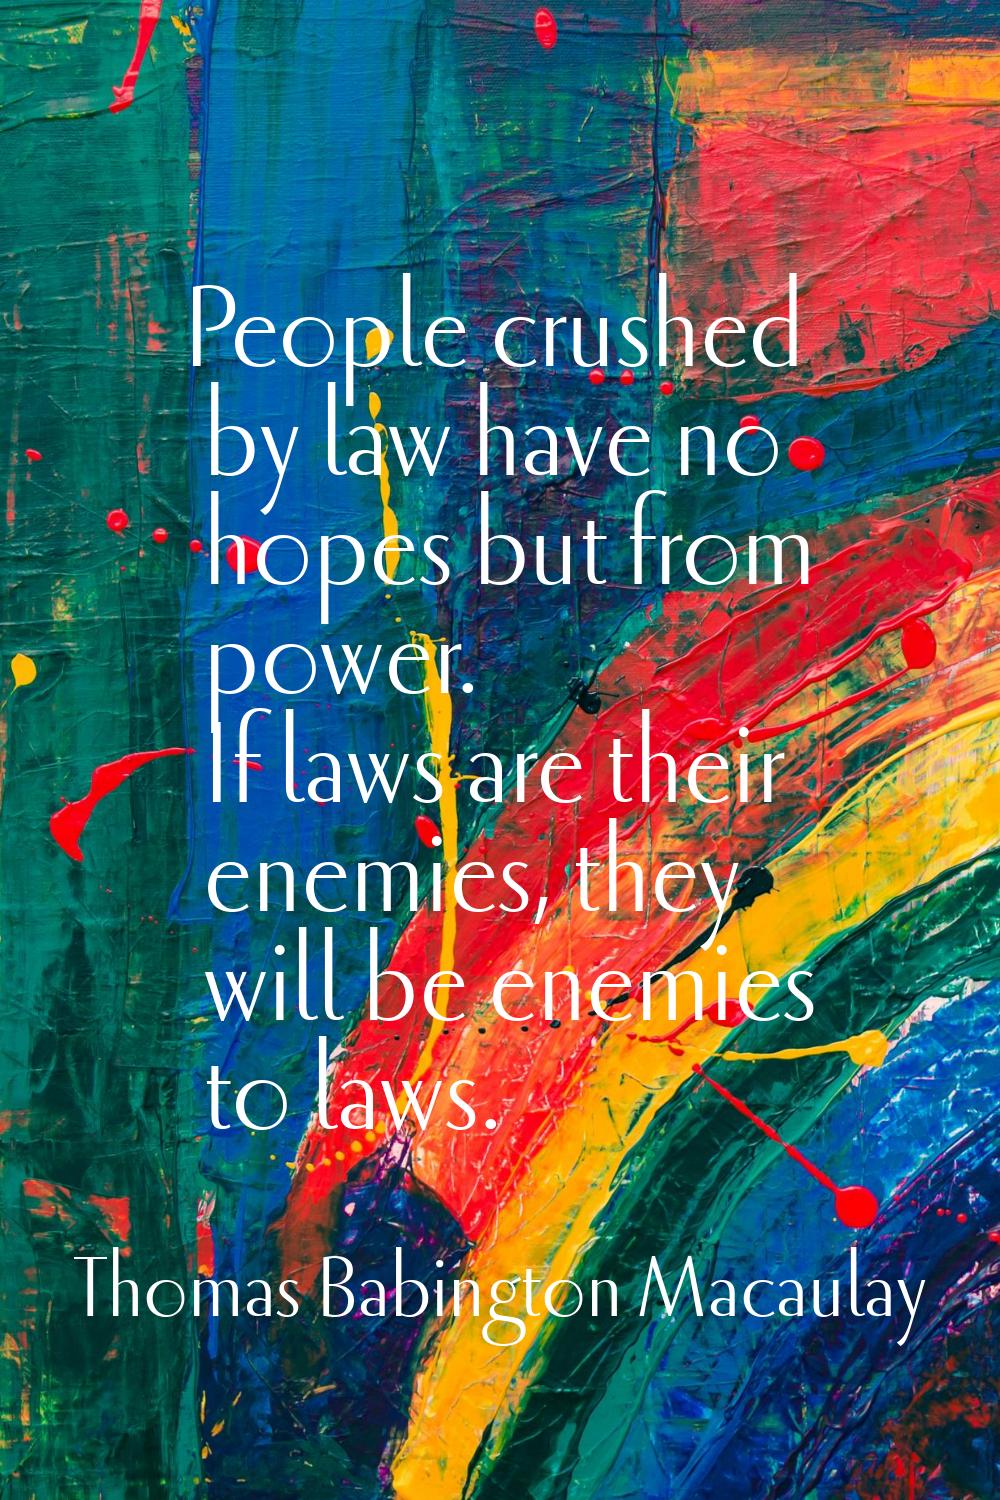 People crushed by law have no hopes but from power. If laws are their enemies, they will be enemies